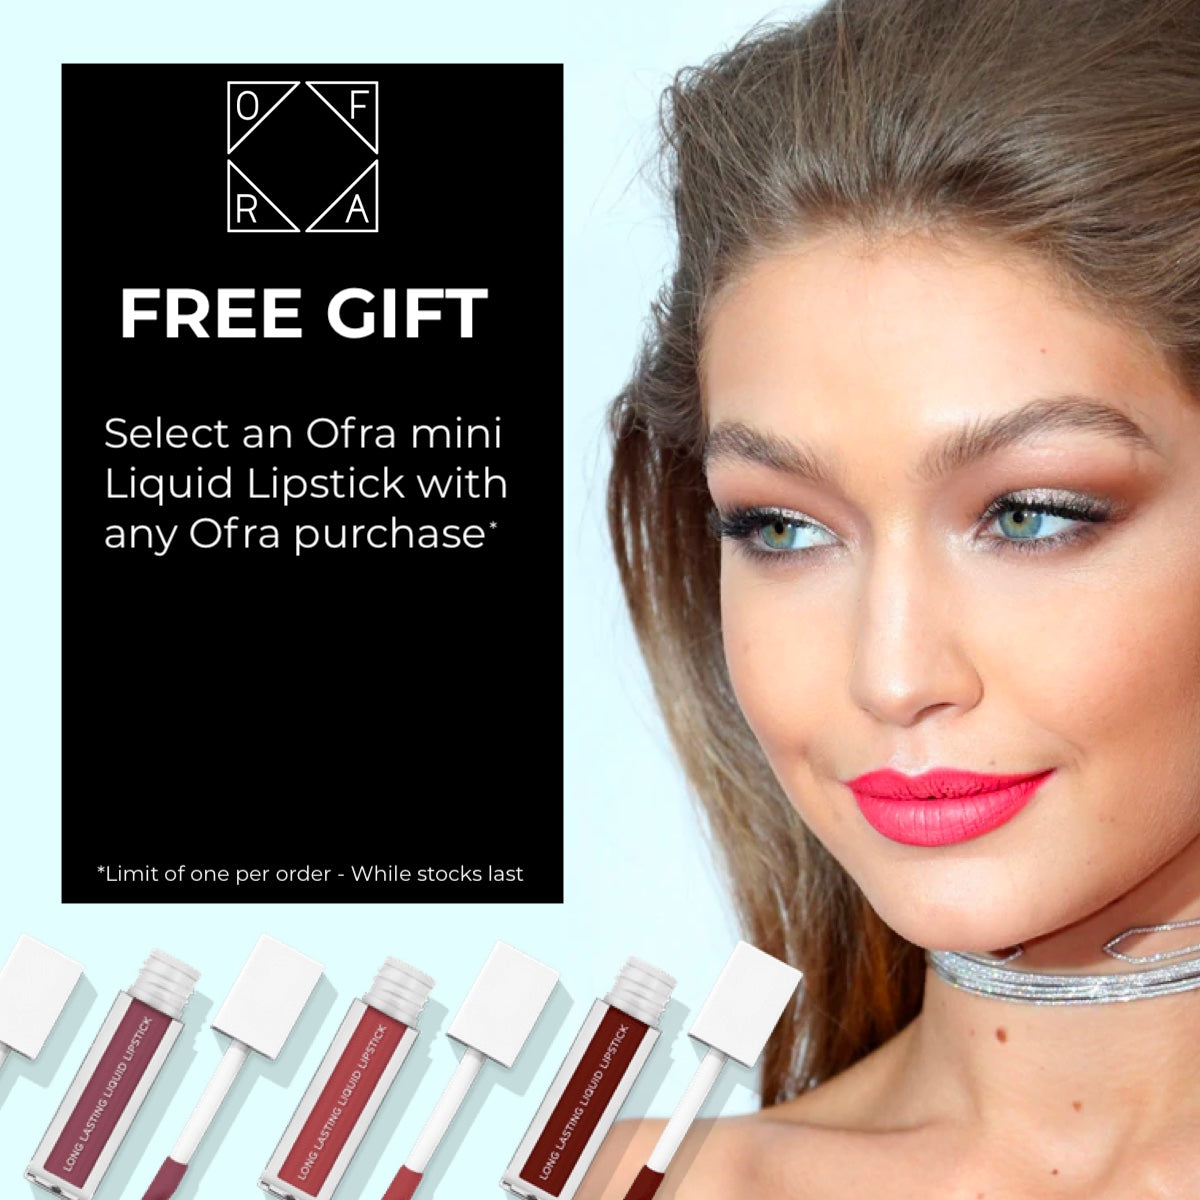 ofra gift with purchase bella scoop